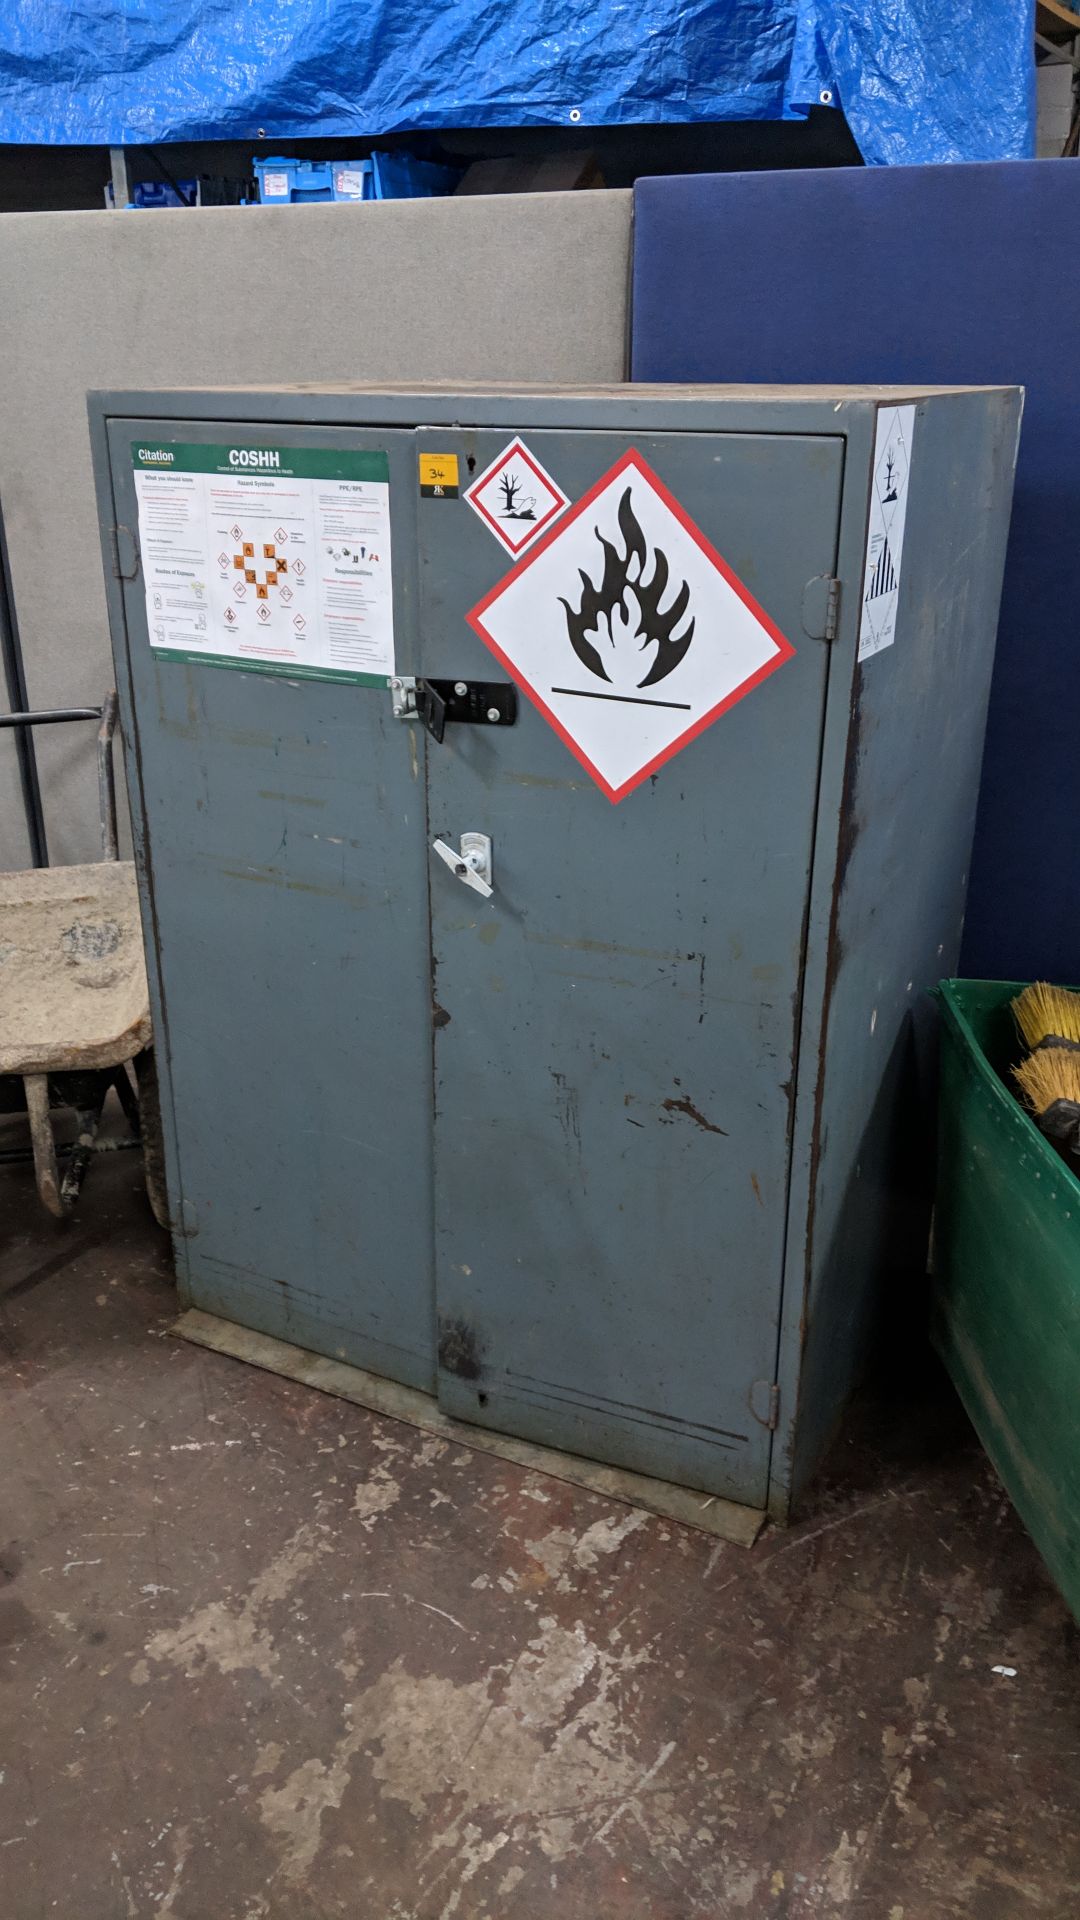 Metal storage cabinet for storing hazardous chemicals, including shackle - purchaser needs to use